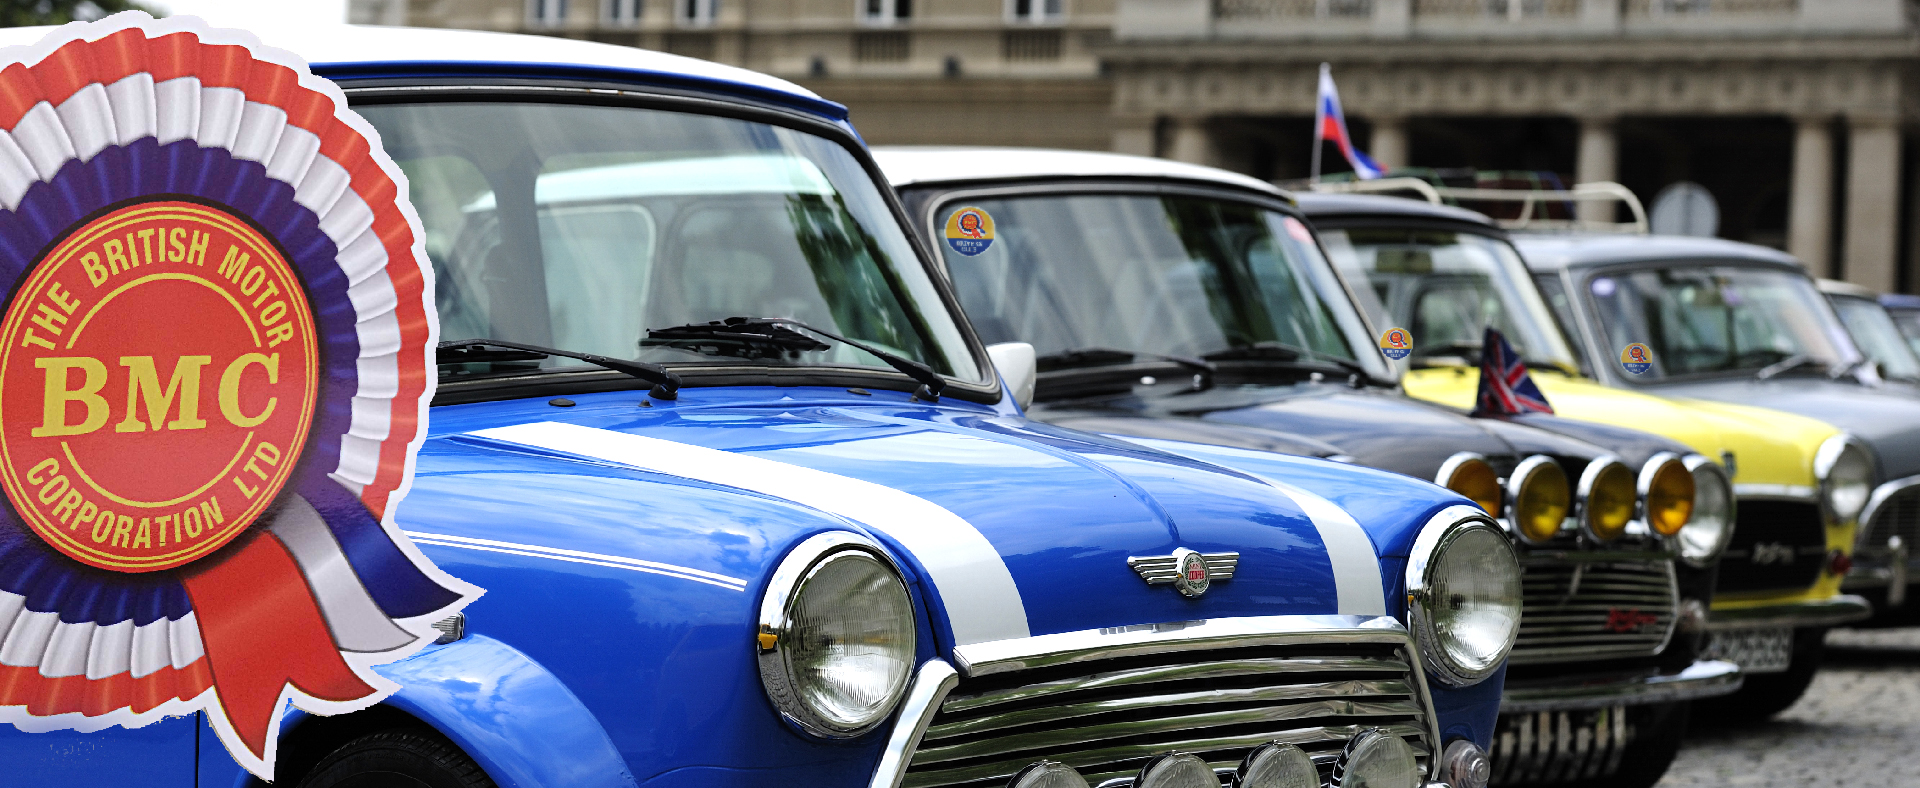 BMC-STICKER-MONTAGE. A row of classic mini cars lined up displaying the BMC stickers available on this website